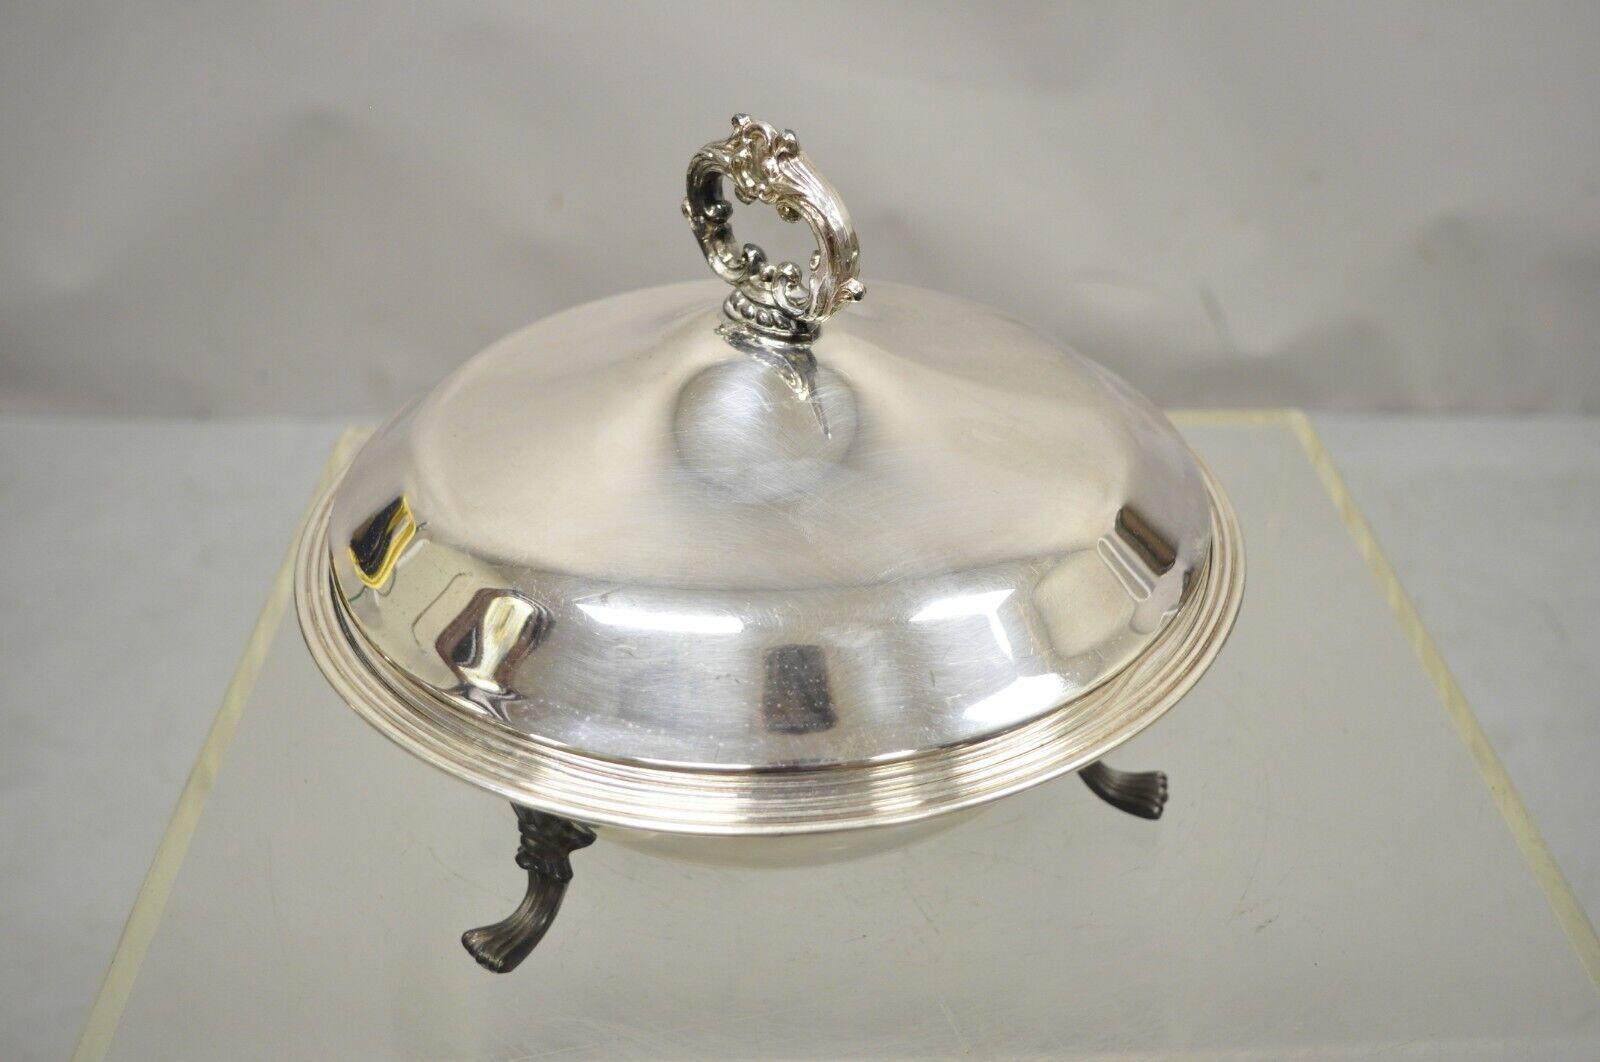 FB Rogers Silver 1158 covered serving dish bowl platter Pyrex Liner. Item features raised on feet, Pyrex glass liner, lidded dome top, original stamp, great style and form. Circa mid 20th Century. Measurements: 8